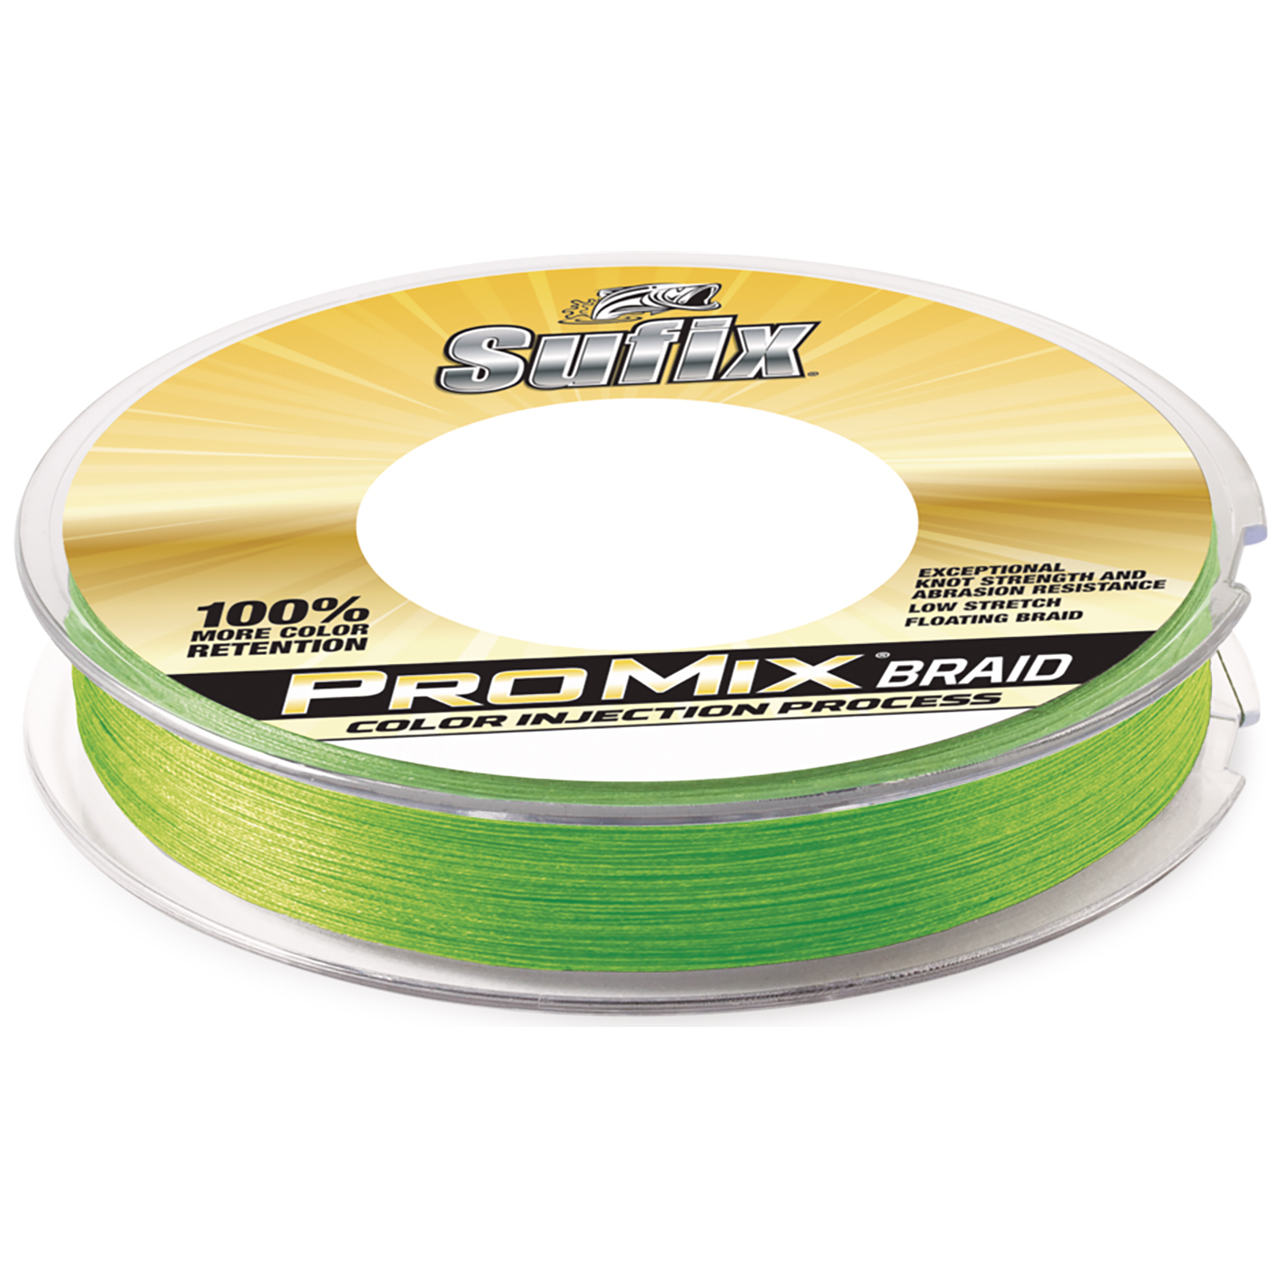 Reaction Tackle Ice Fishing Braided Line - 8 strand Professional Grade 